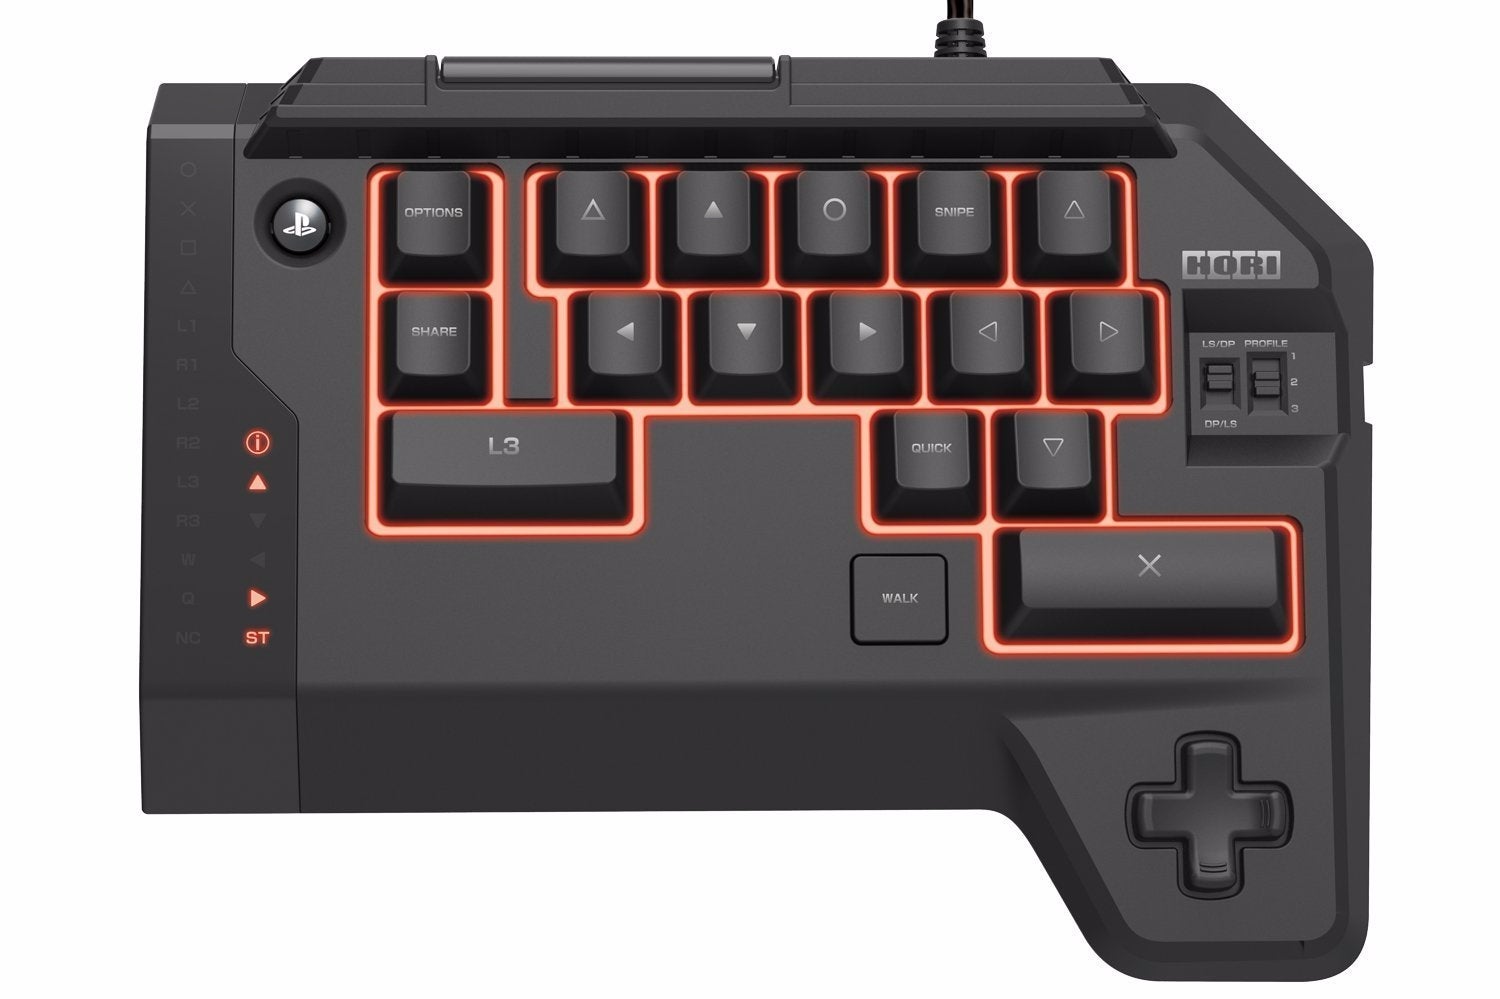 PS4 keyboard mouse controller replicates PC FPS-style gaming | Eurogamer.net